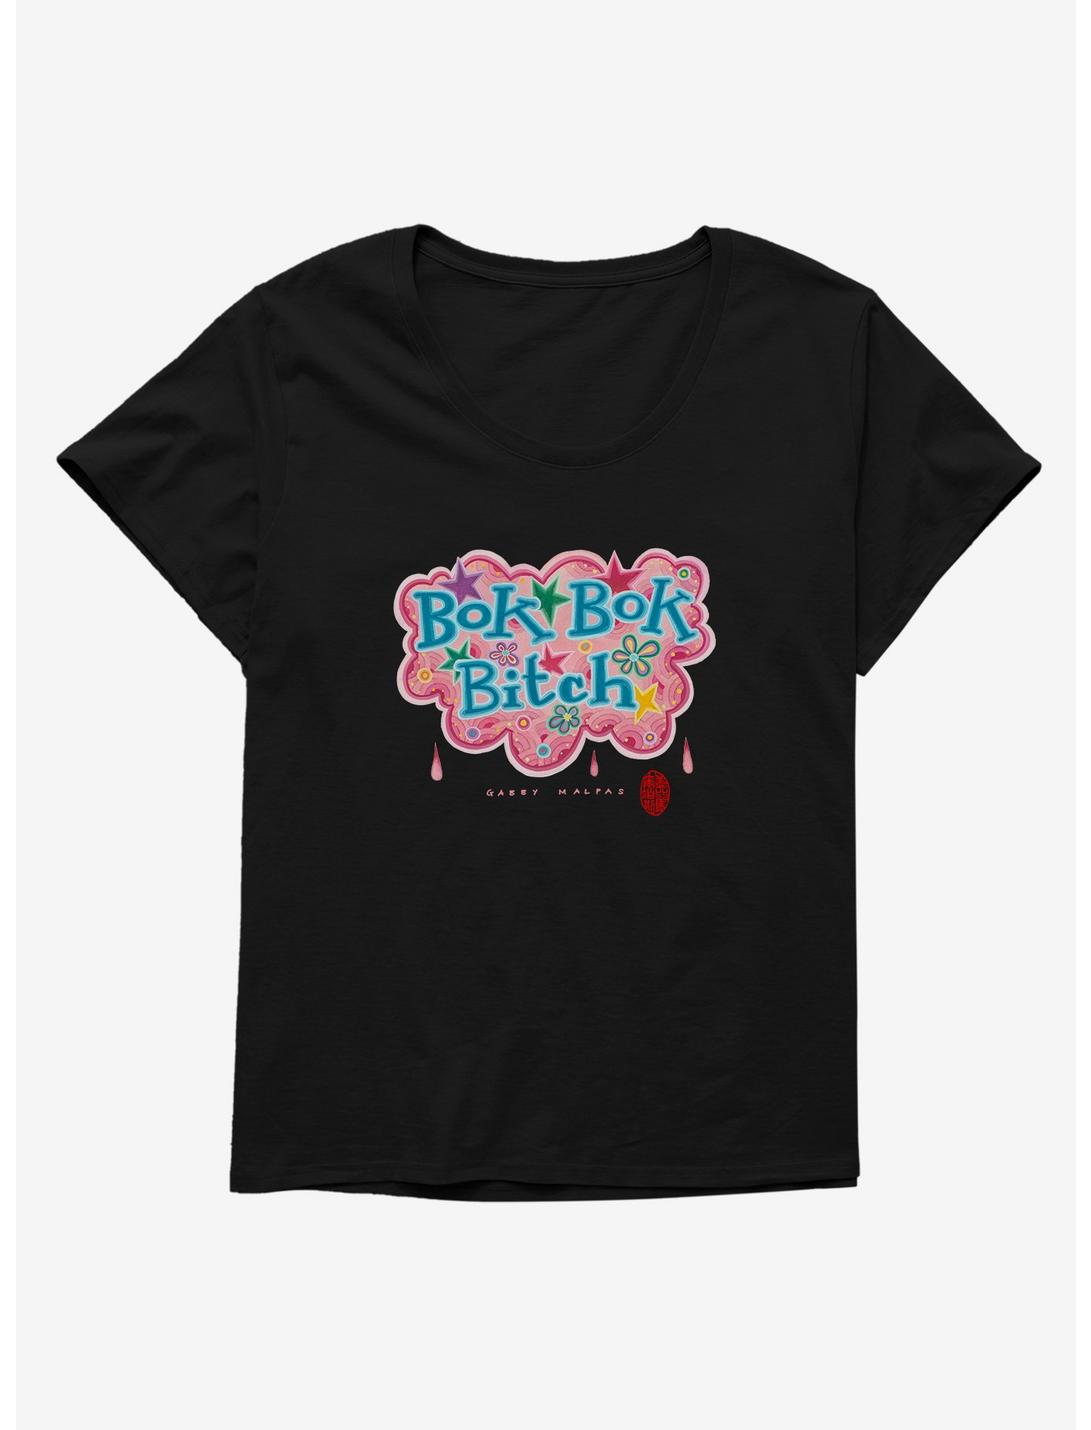 Hot Topic Foundation X American & Pacific Islander Heritage Month Starry Bok Bok Bitch Girls T-Shirt Plus Size, , hi-res